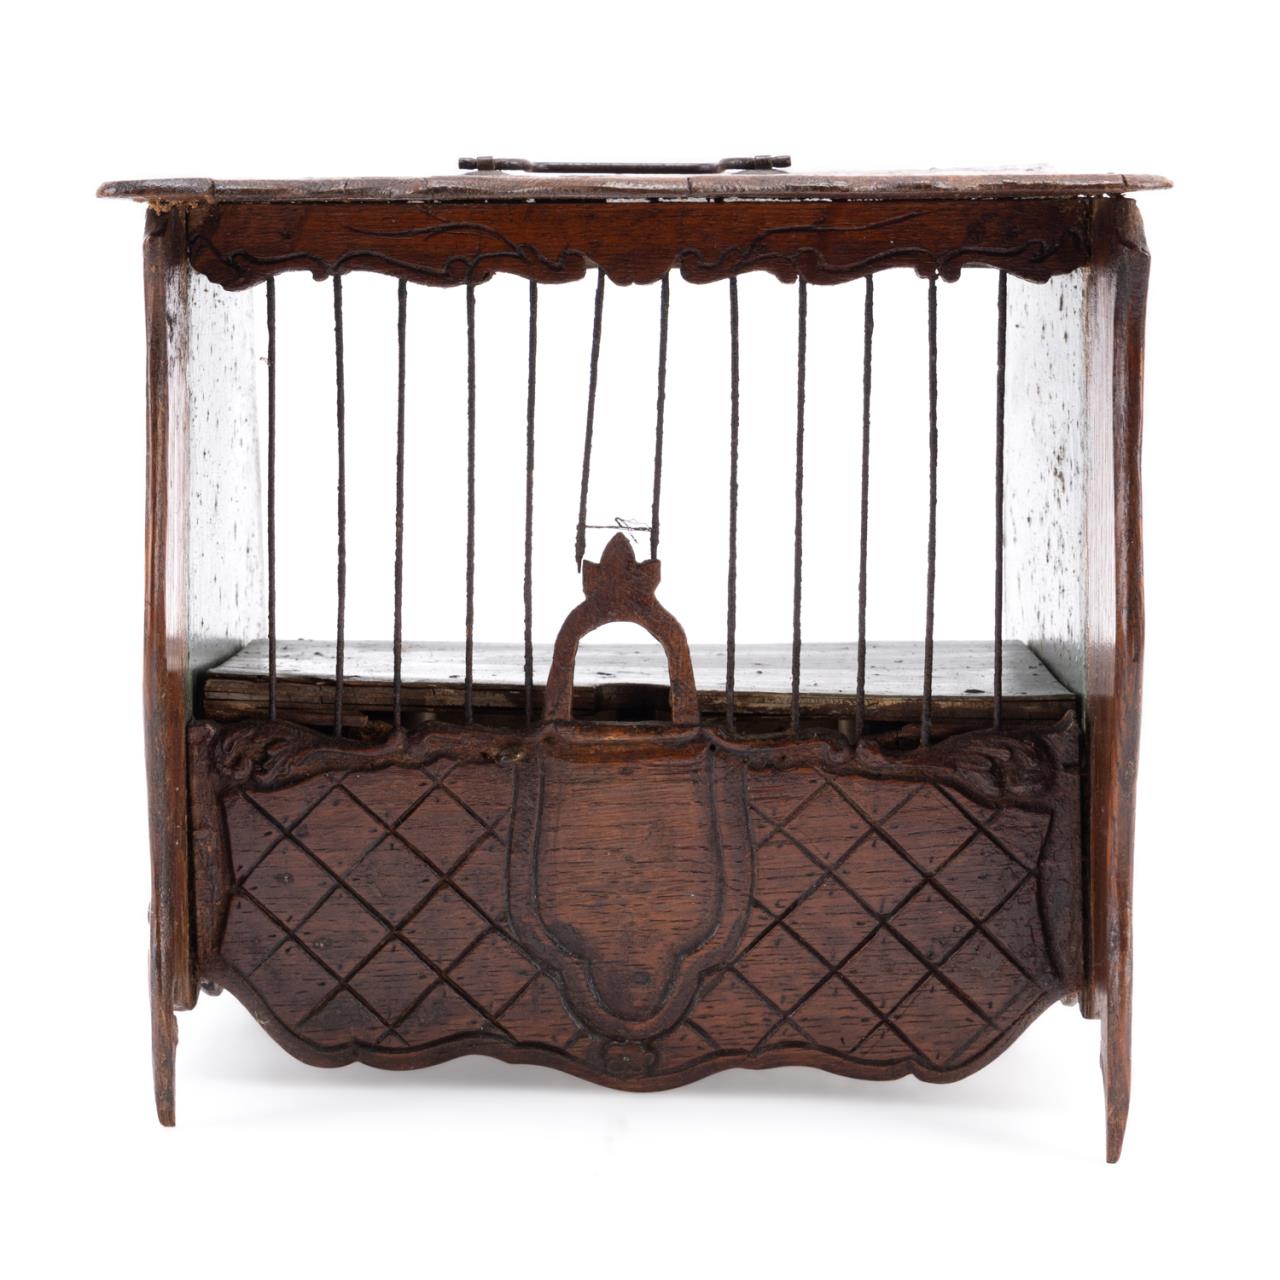 LOUIS XV STYLE CARVED WOODEN BIRDCAGE